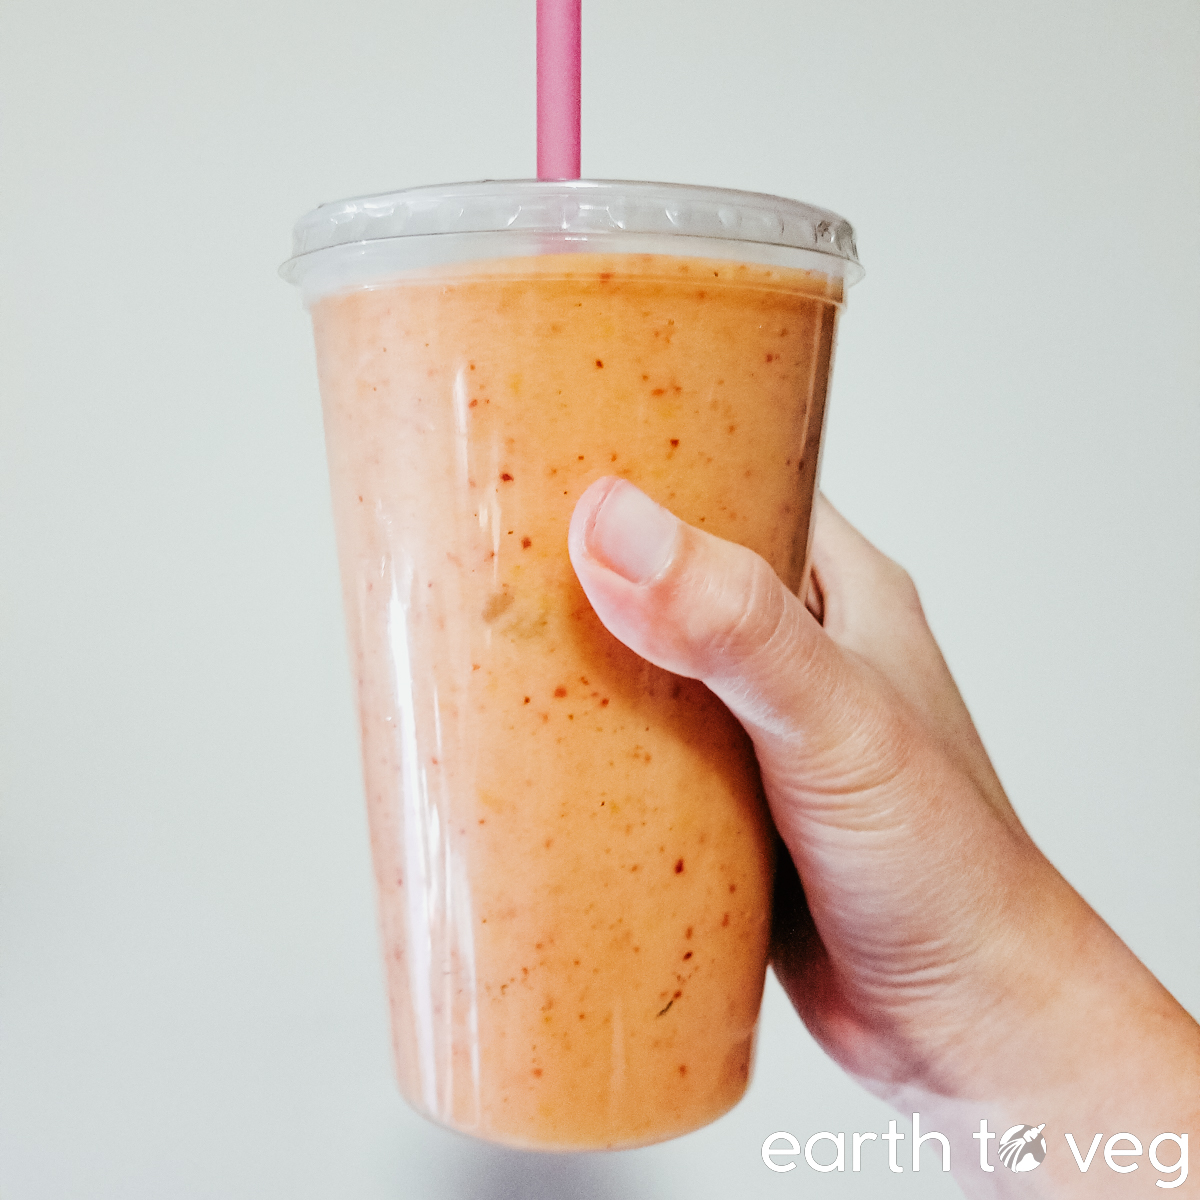 A hand holds up a plastic tumbler full of vibrant orange smoothie.